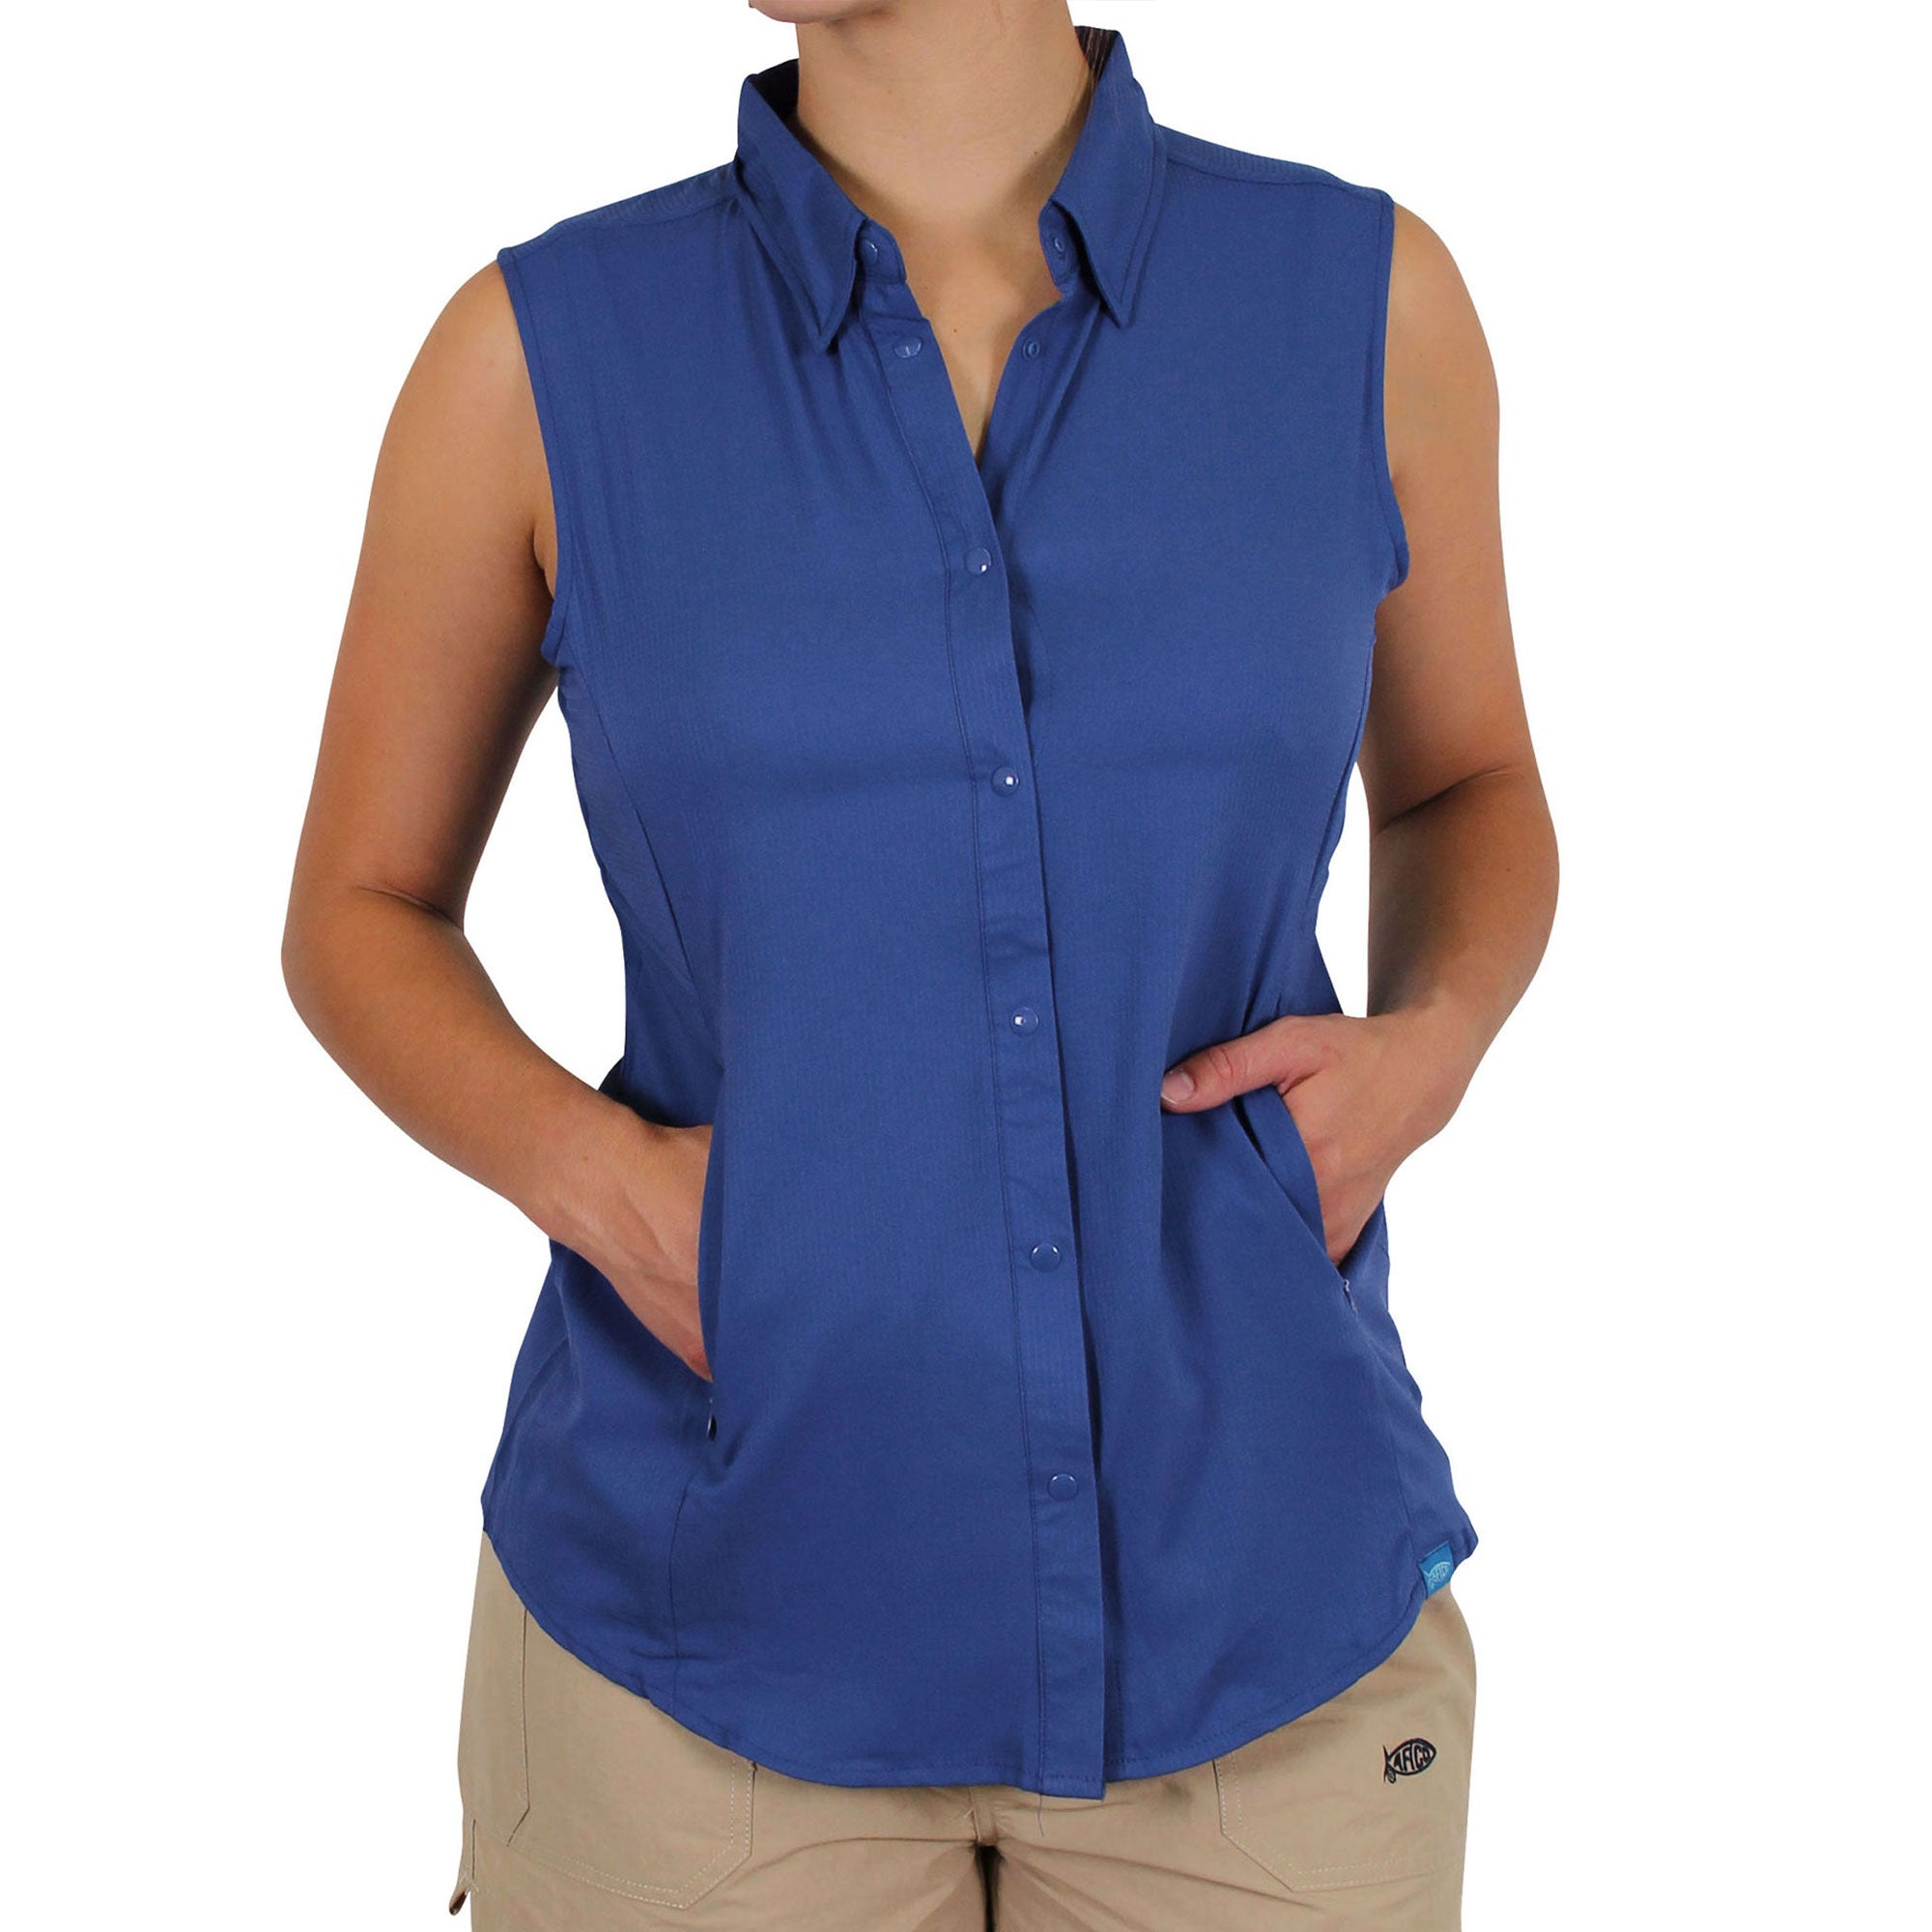 FAFWYP Womens Solid Sleeveless Button Down Office Shirts with